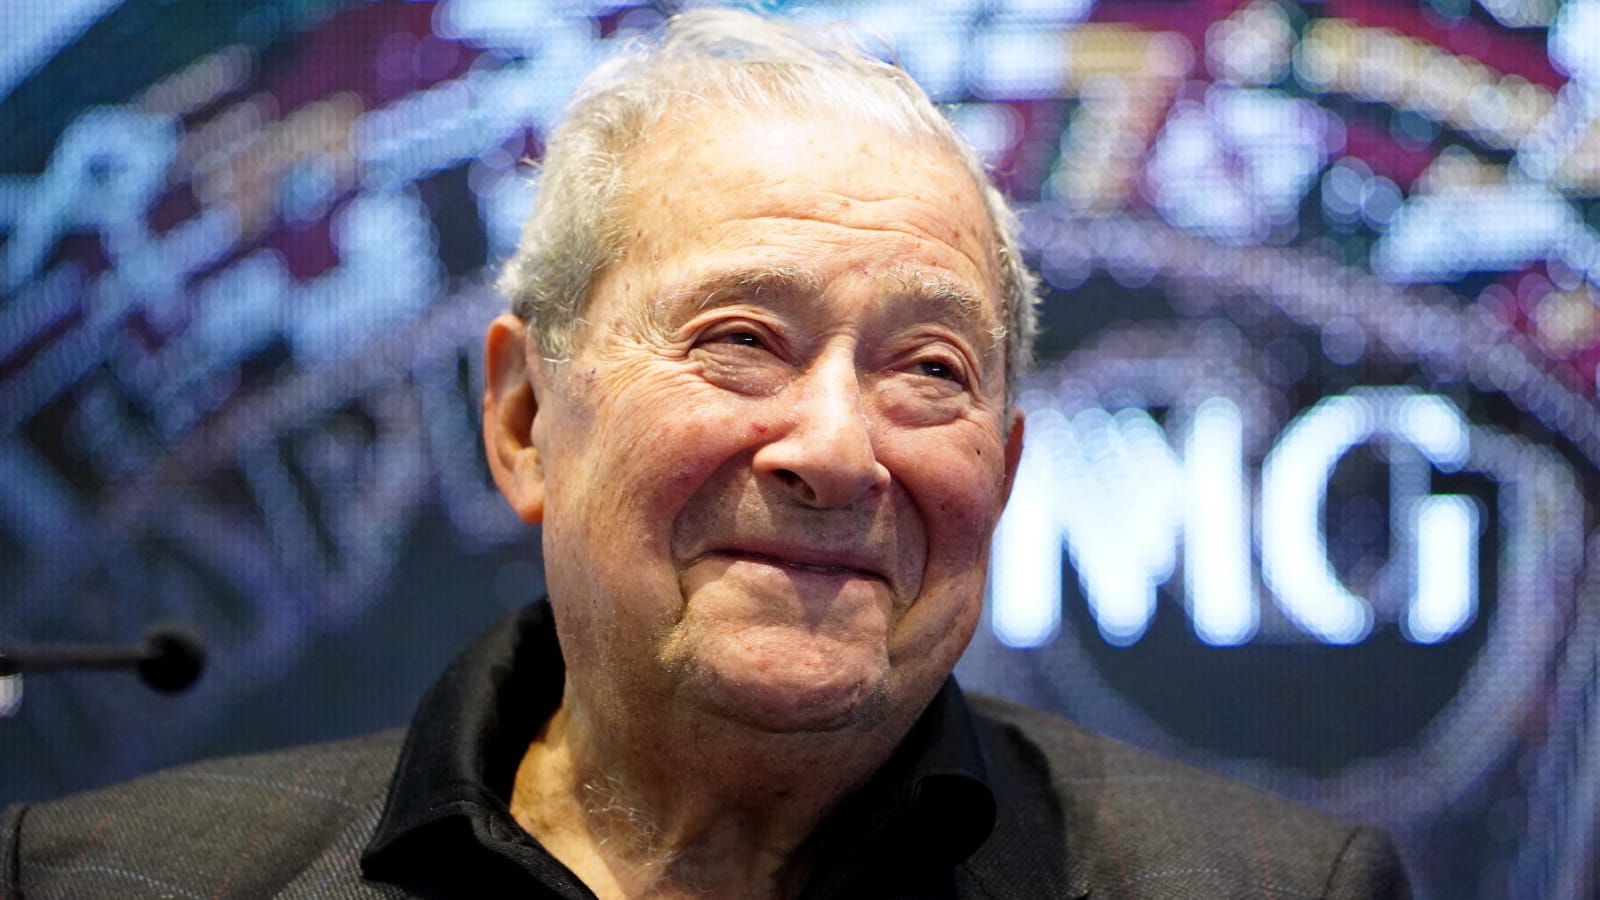 ‘Every Serious Boxing Fan Will Be Watching That in Awe’: Bob Arum Teases Stunning Lightweight Showdown